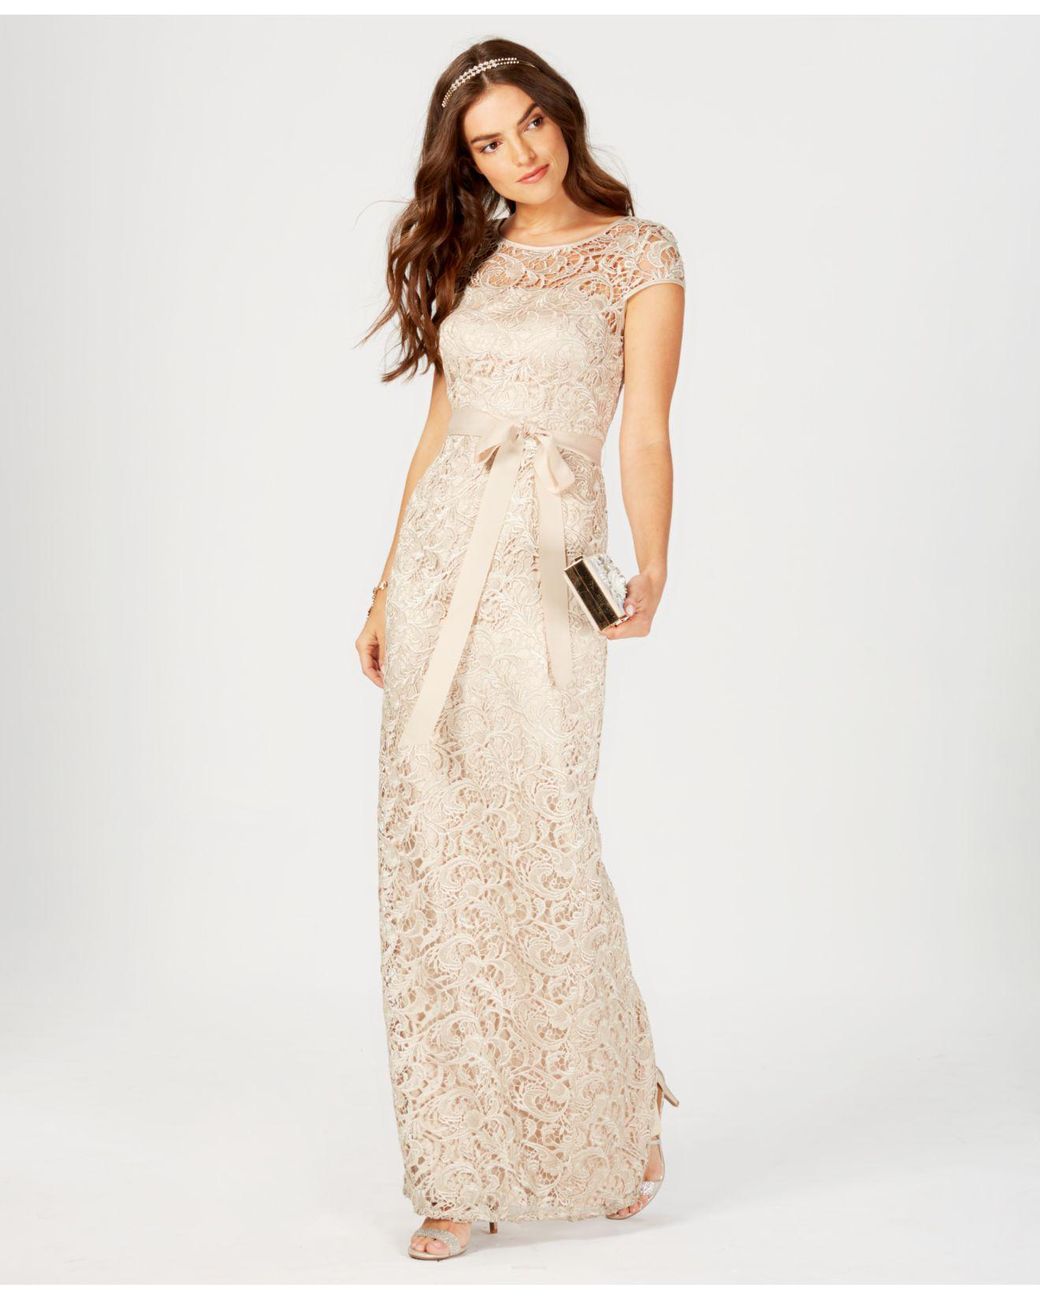 Ocho Colapso mordaz Adrianna Papell Lace Cap-Sleeve Gown in Natural | Lyst